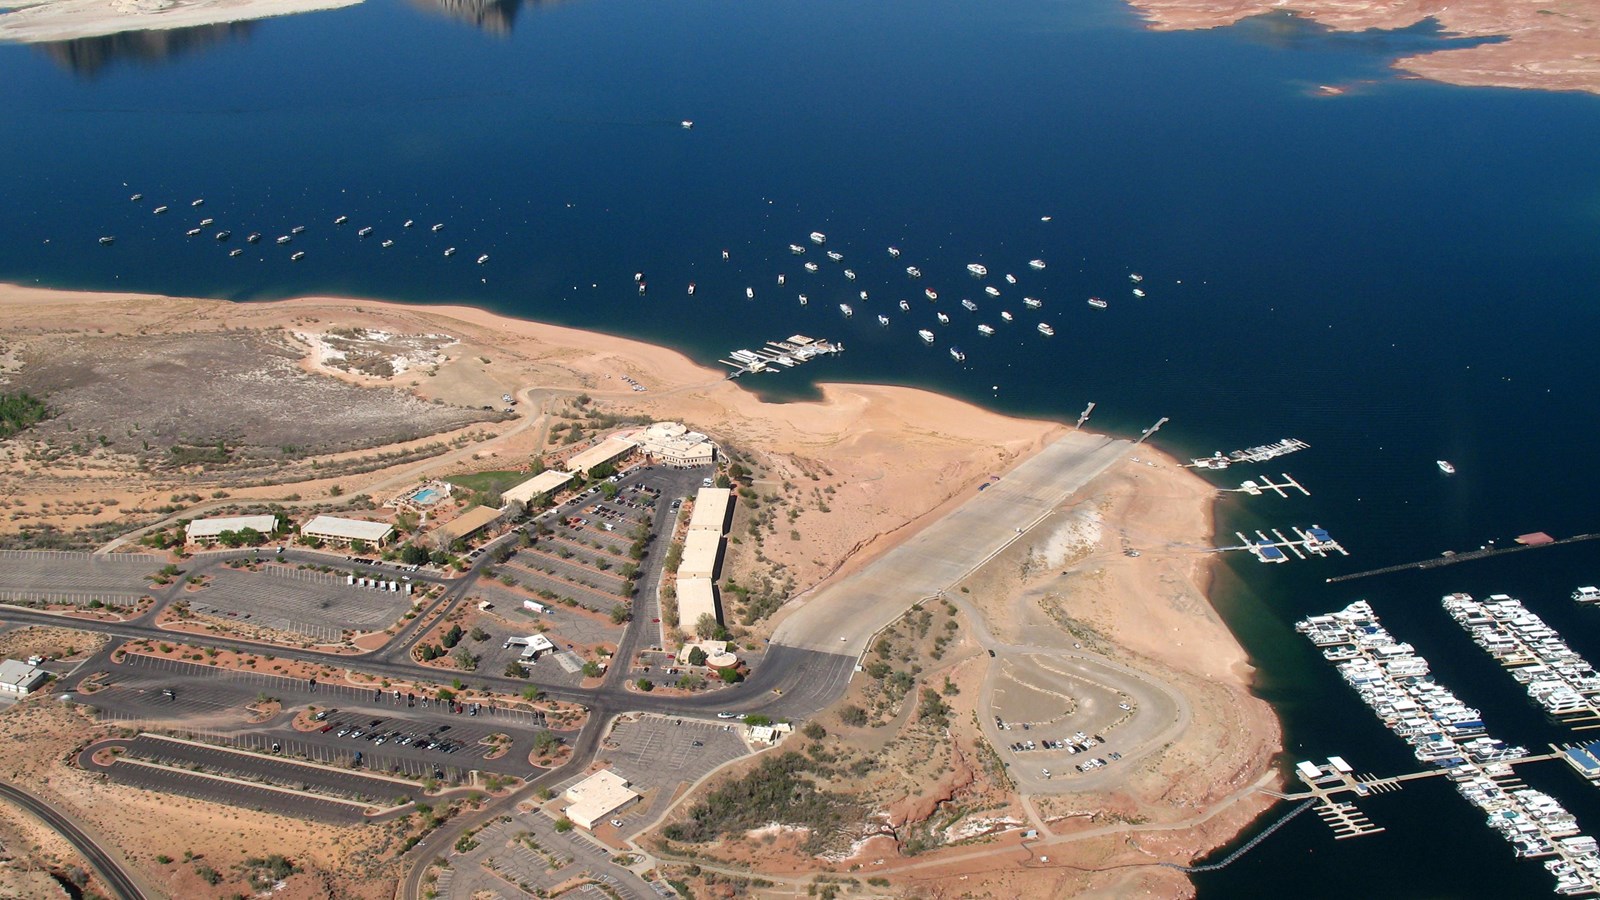 Aerial view of lake with roads, buildings, and launch ramp